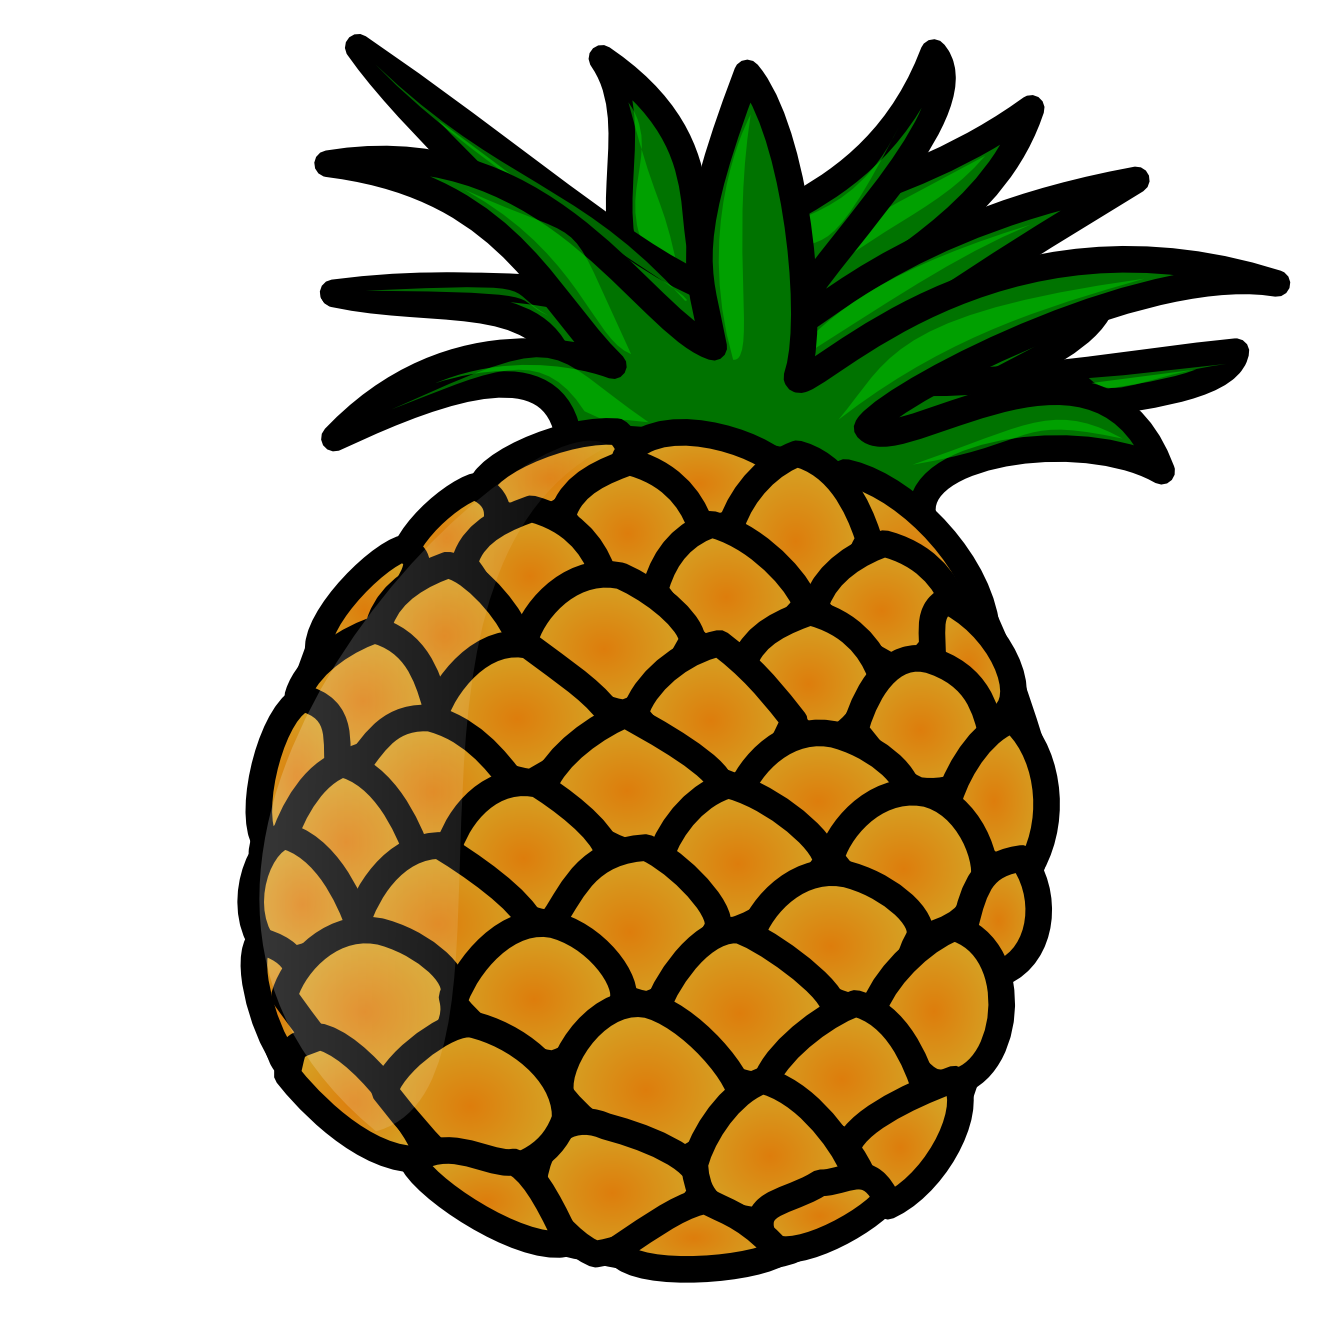 Pineapple Clip Art Icons | Clipart Panda - Free Clipart Images